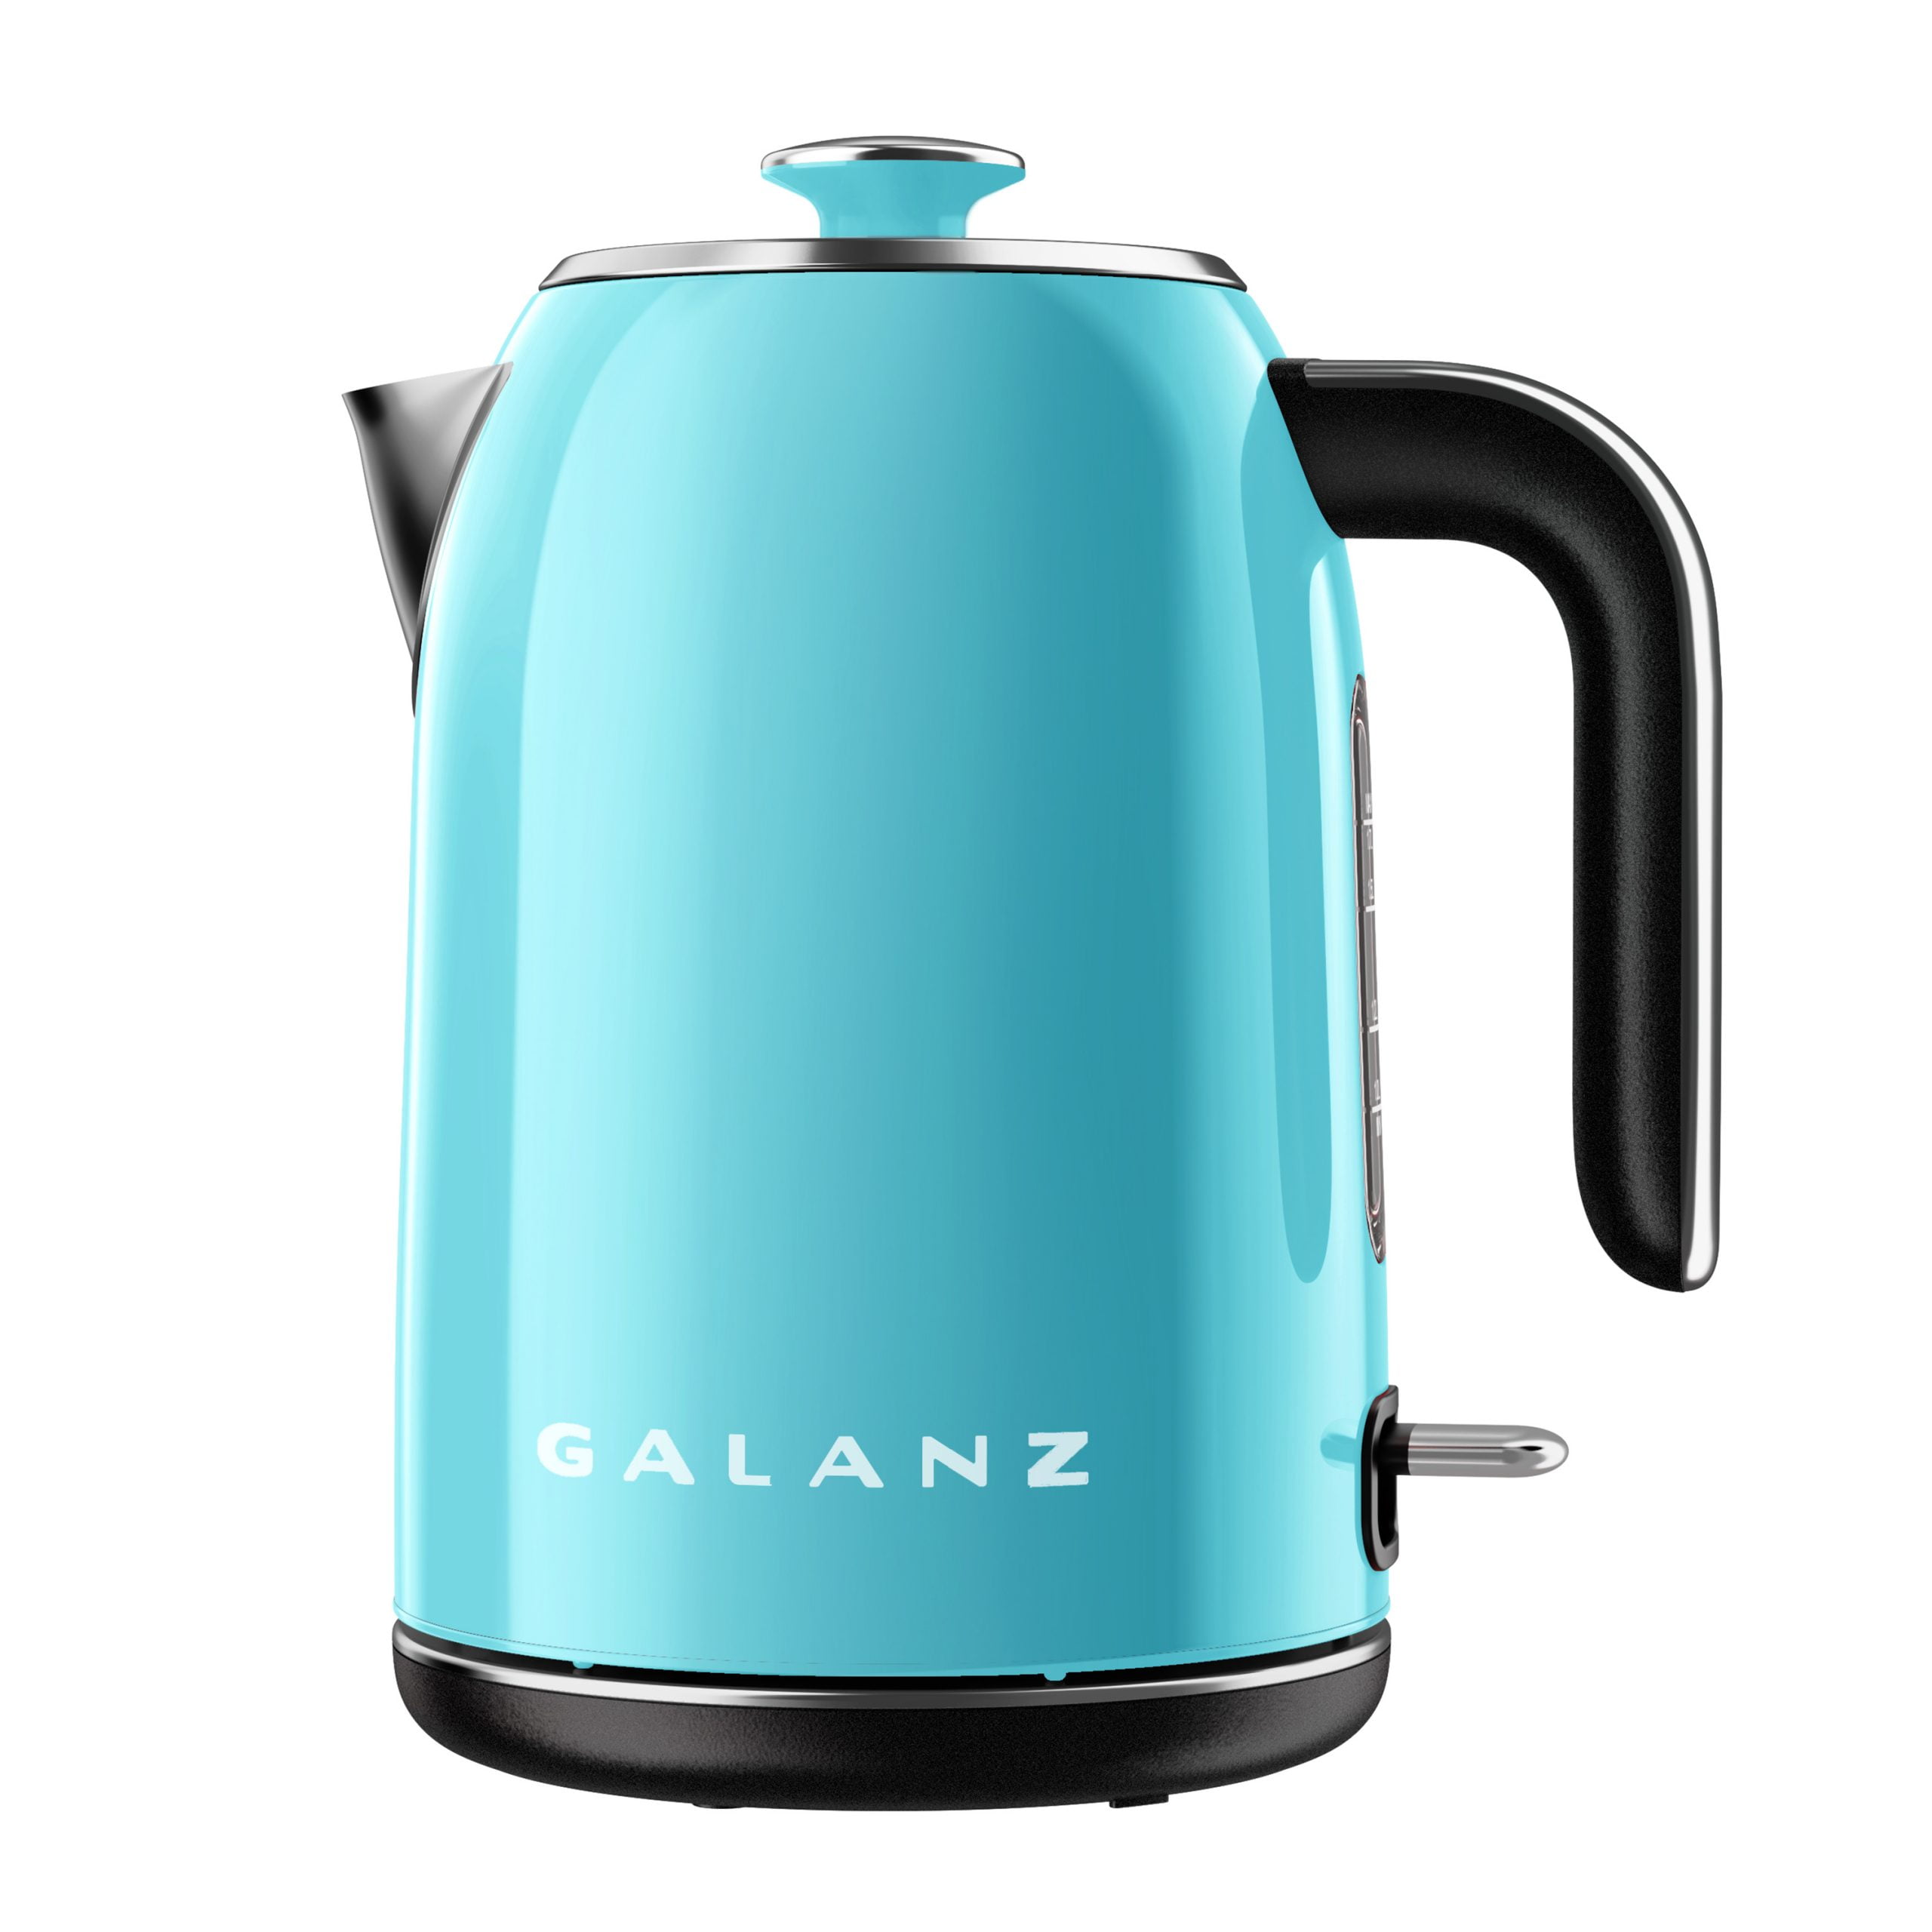 Galanz Retro Electric Kettle with Heat Resistant Handle and